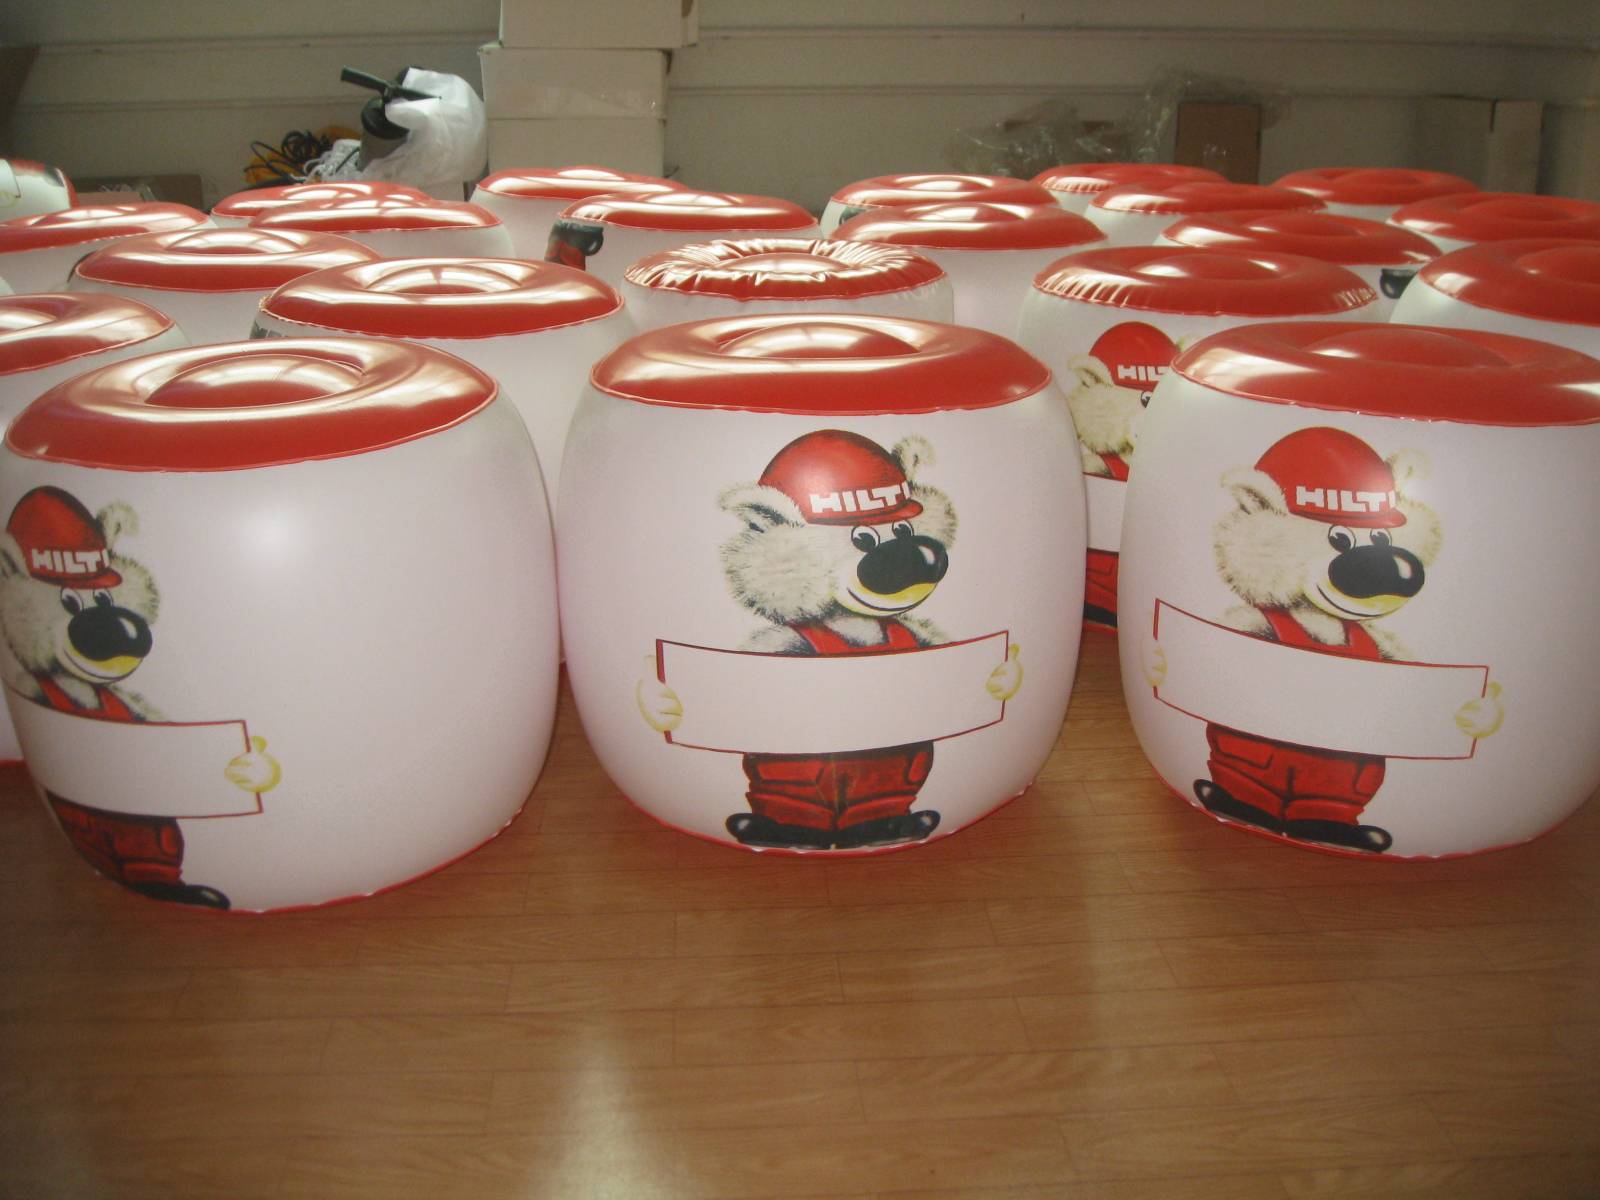 Customised Inflatable Furniture Sealed Cylinder Stool For Kids, Teens Room,Funny Indoor/Outdoor